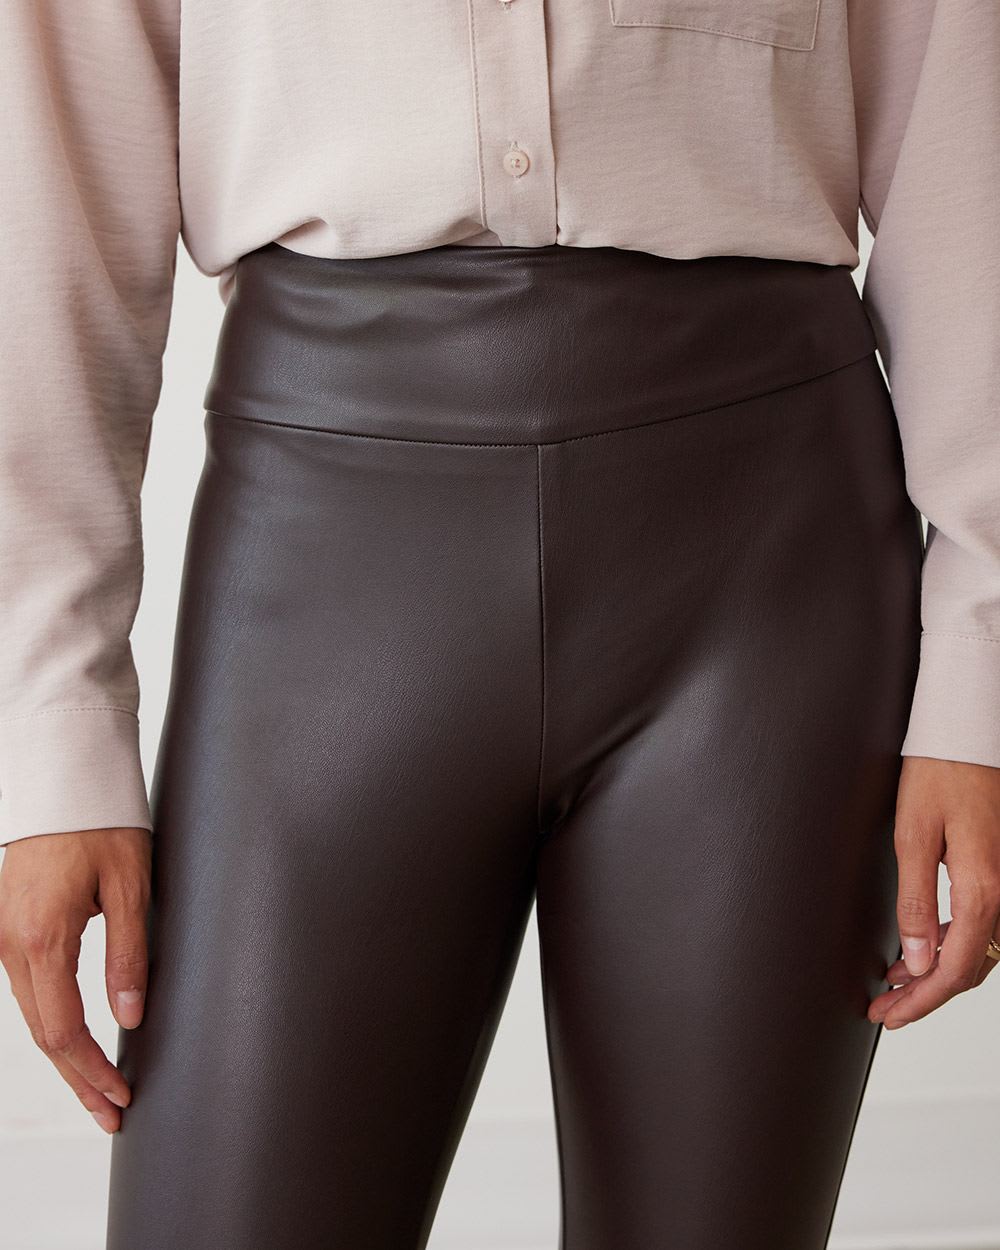 High-Rise Stretch Faux Leather Leggings - Tall